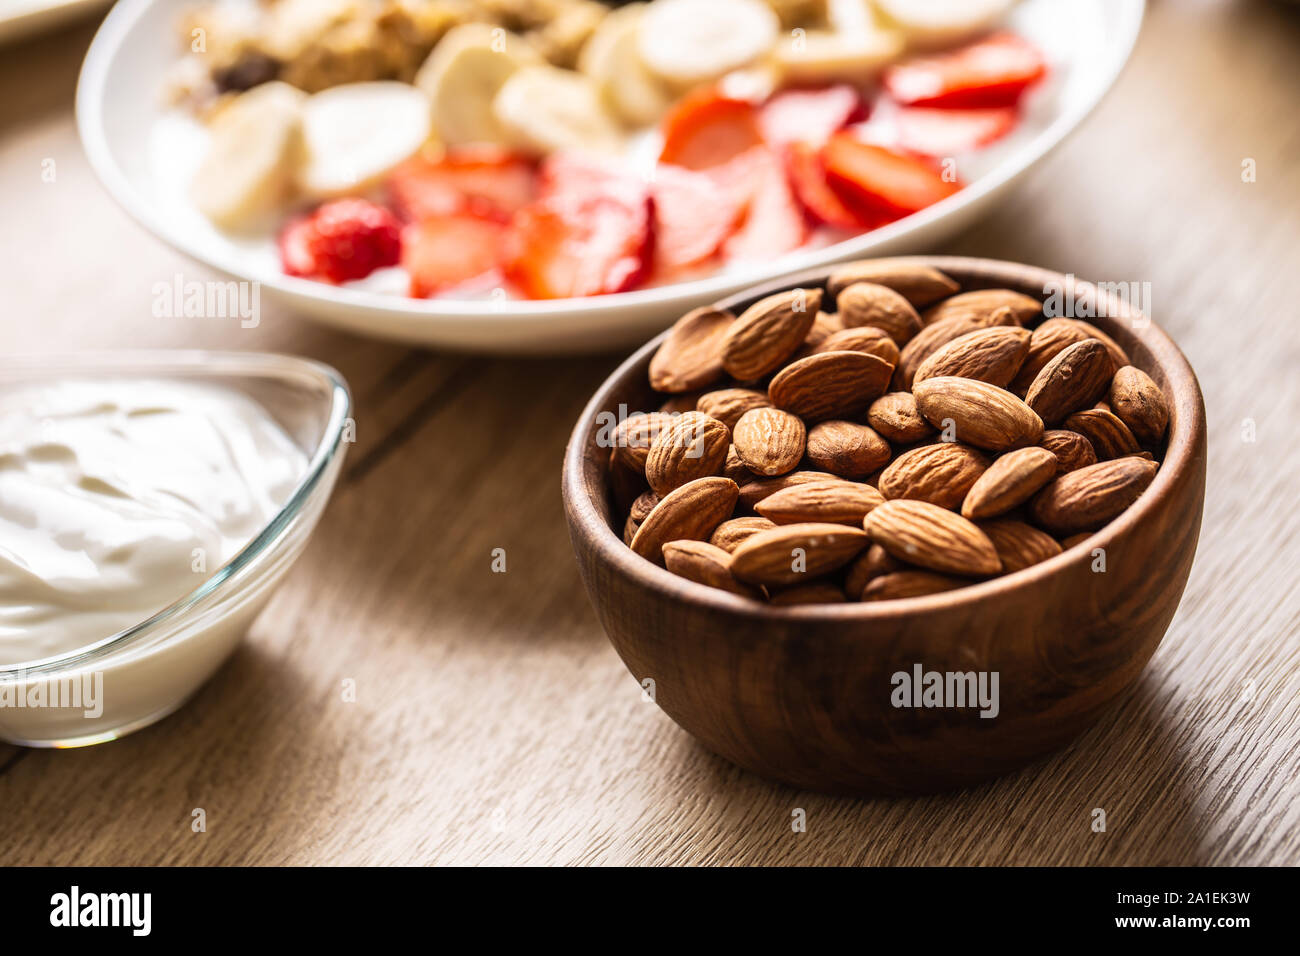 Almonds in wooden bowl with yoguth and plate of healthy breakfast Stock Photo